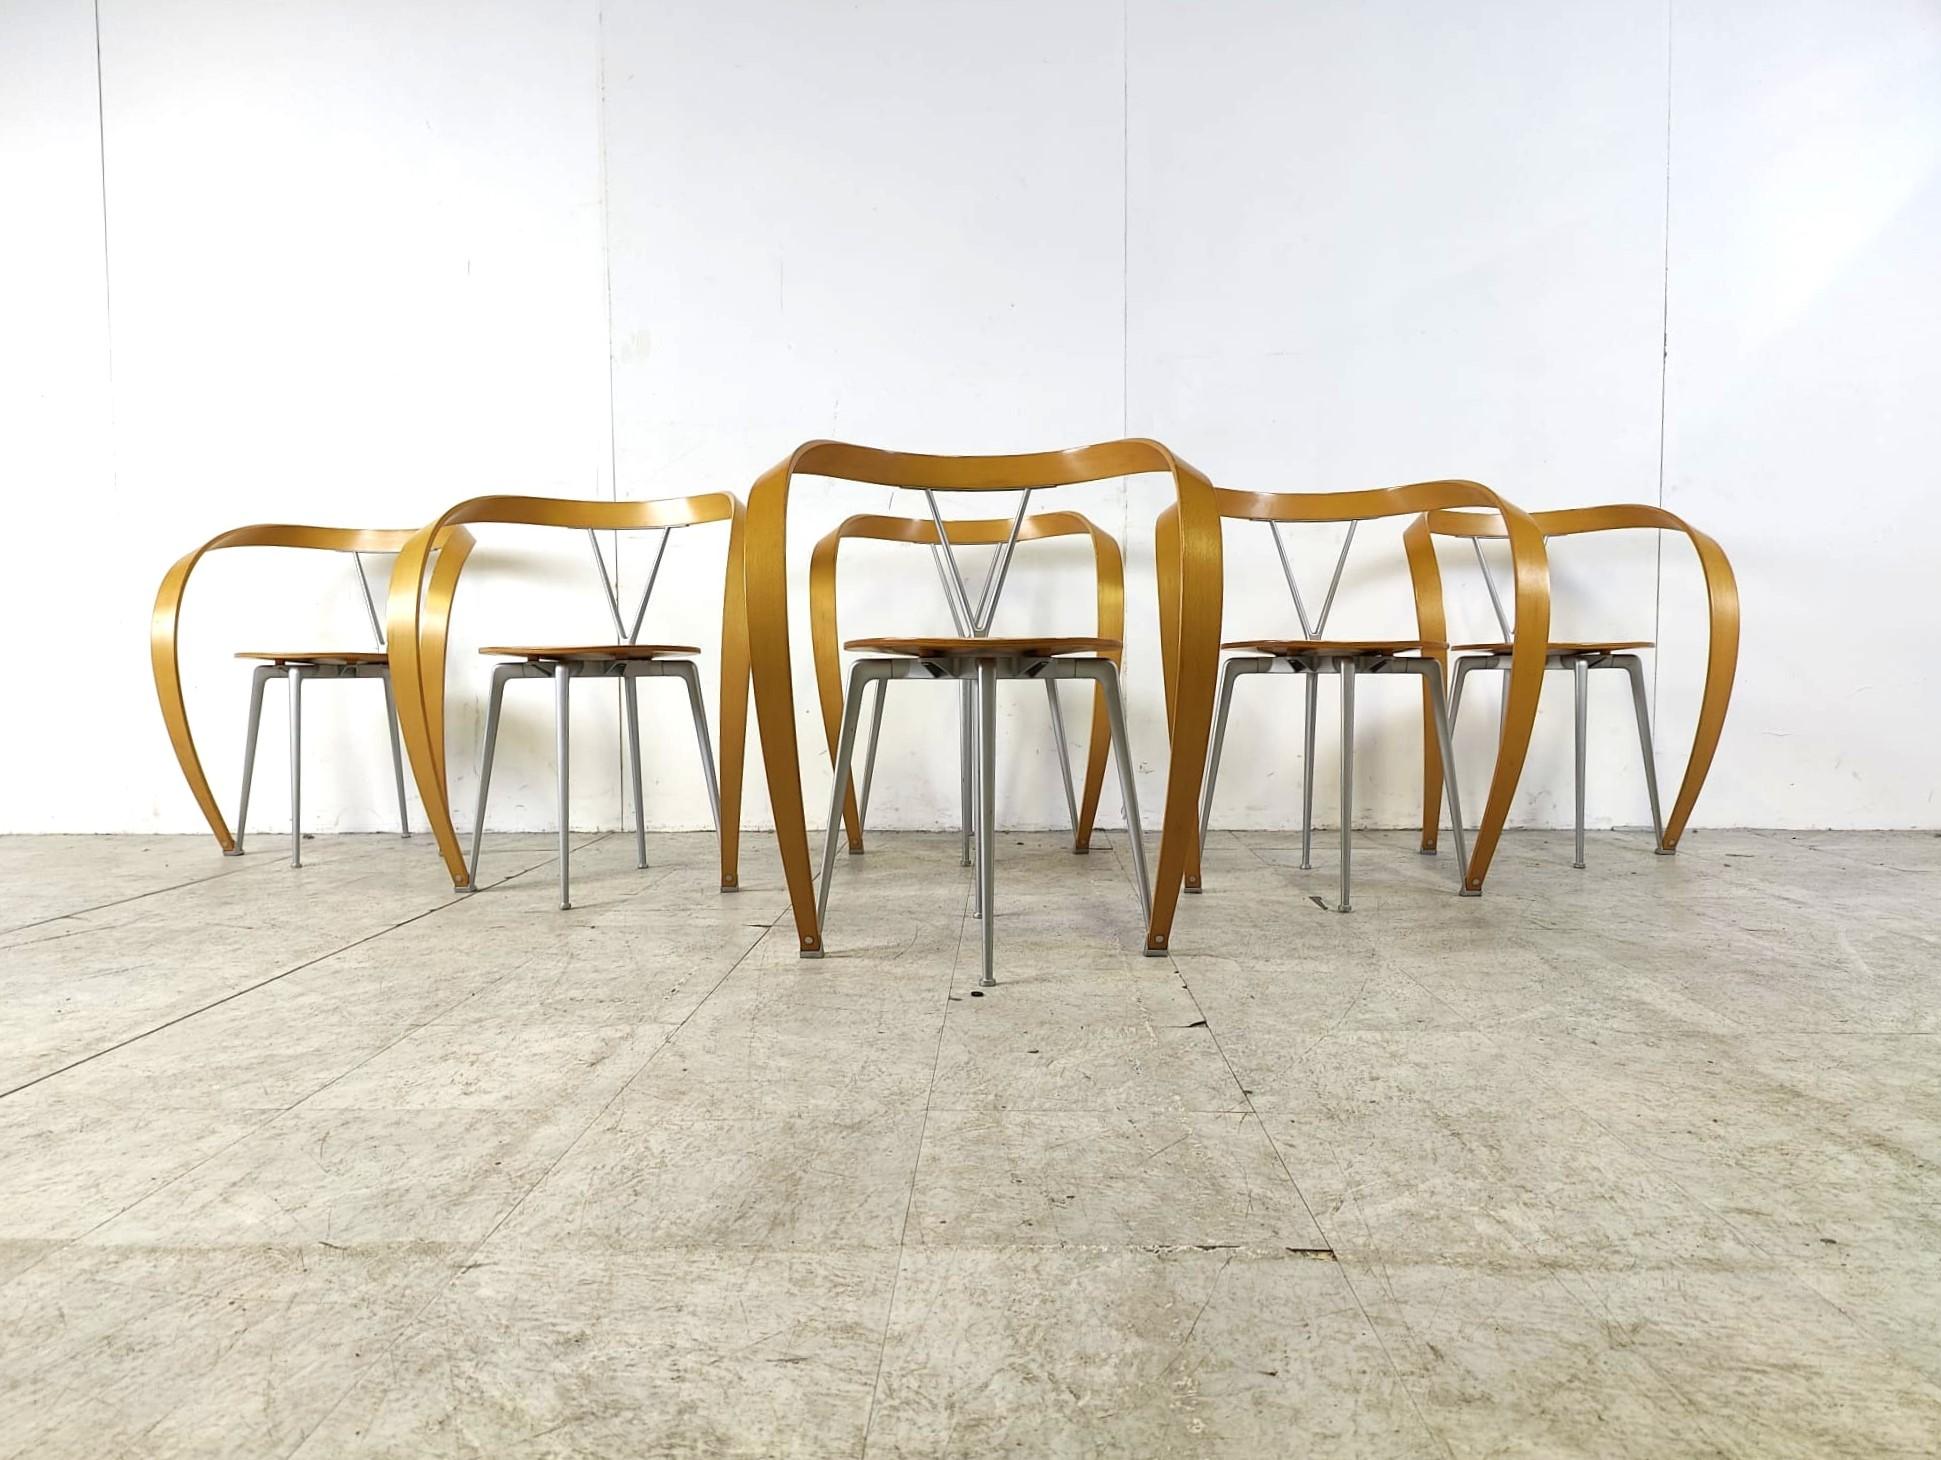 Set of 6 'revers' armchairs or dining chairs.

Striking design by Andrea Branzi and produced by Cassina.

Designed in 1993.

Made from laminated beech wood and grey lacquered metal frame. 

Good condition.

1993- Italy

Dimensions
Height: